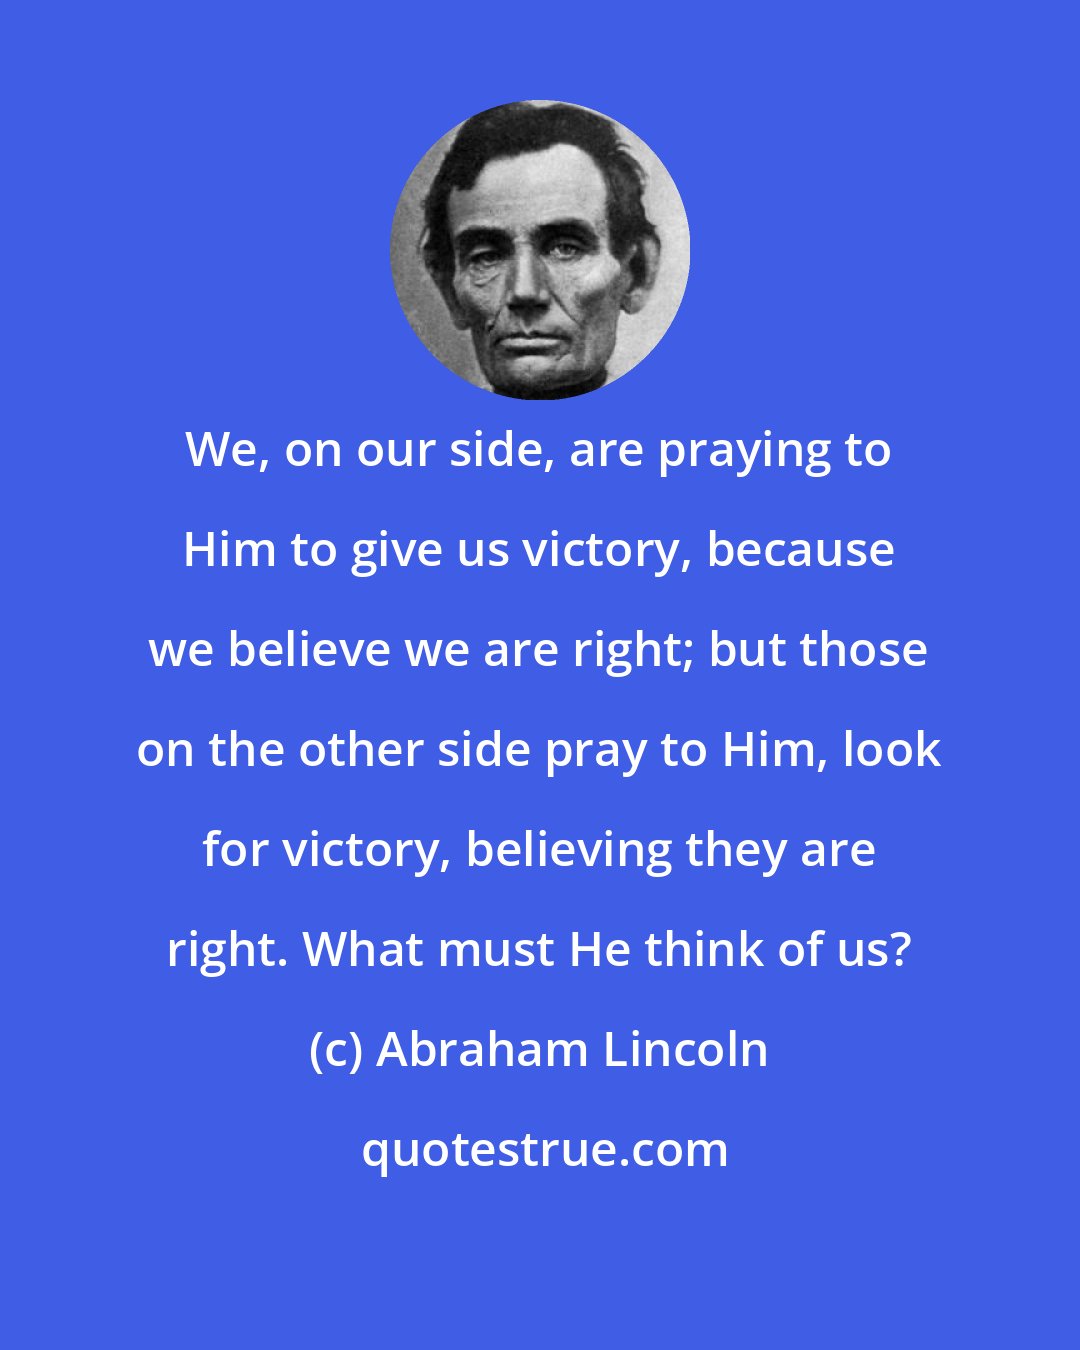 Abraham Lincoln: We, on our side, are praying to Him to give us victory, because we believe we are right; but those on the other side pray to Him, look for victory, believing they are right. What must He think of us?